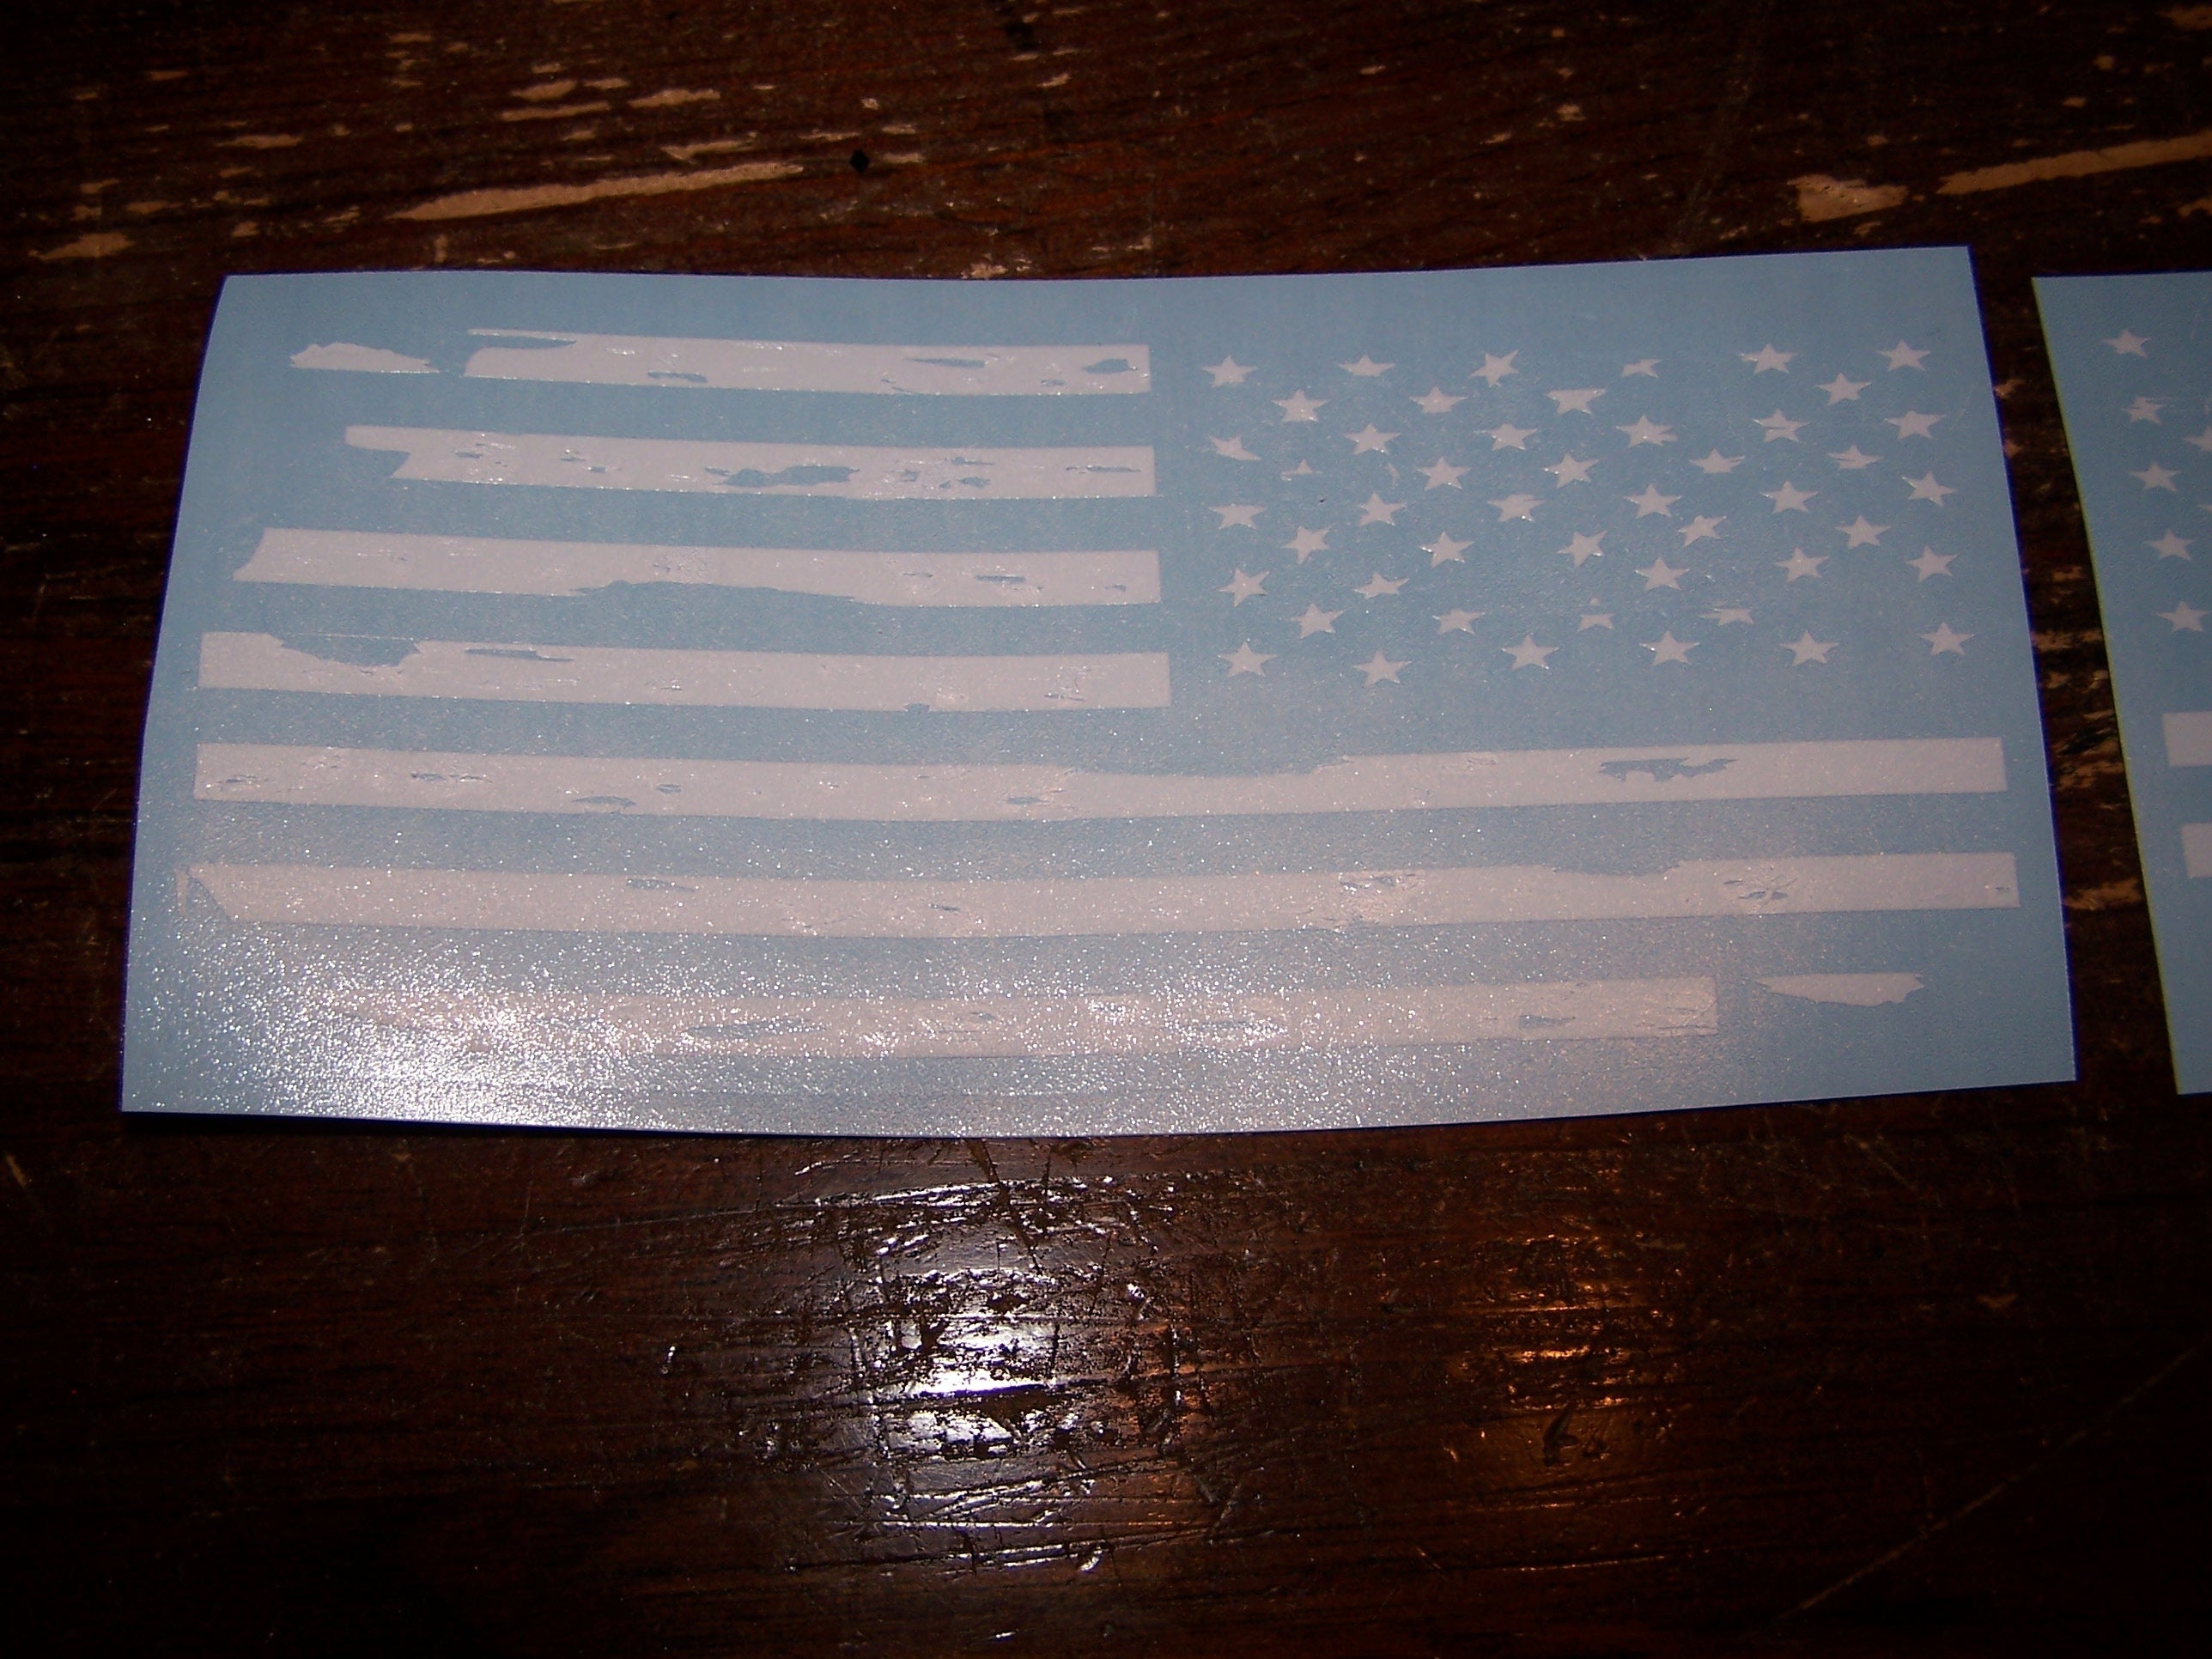 DISTRESSED SMALL AMERICAN FLAG VINYL DECAL STICKER